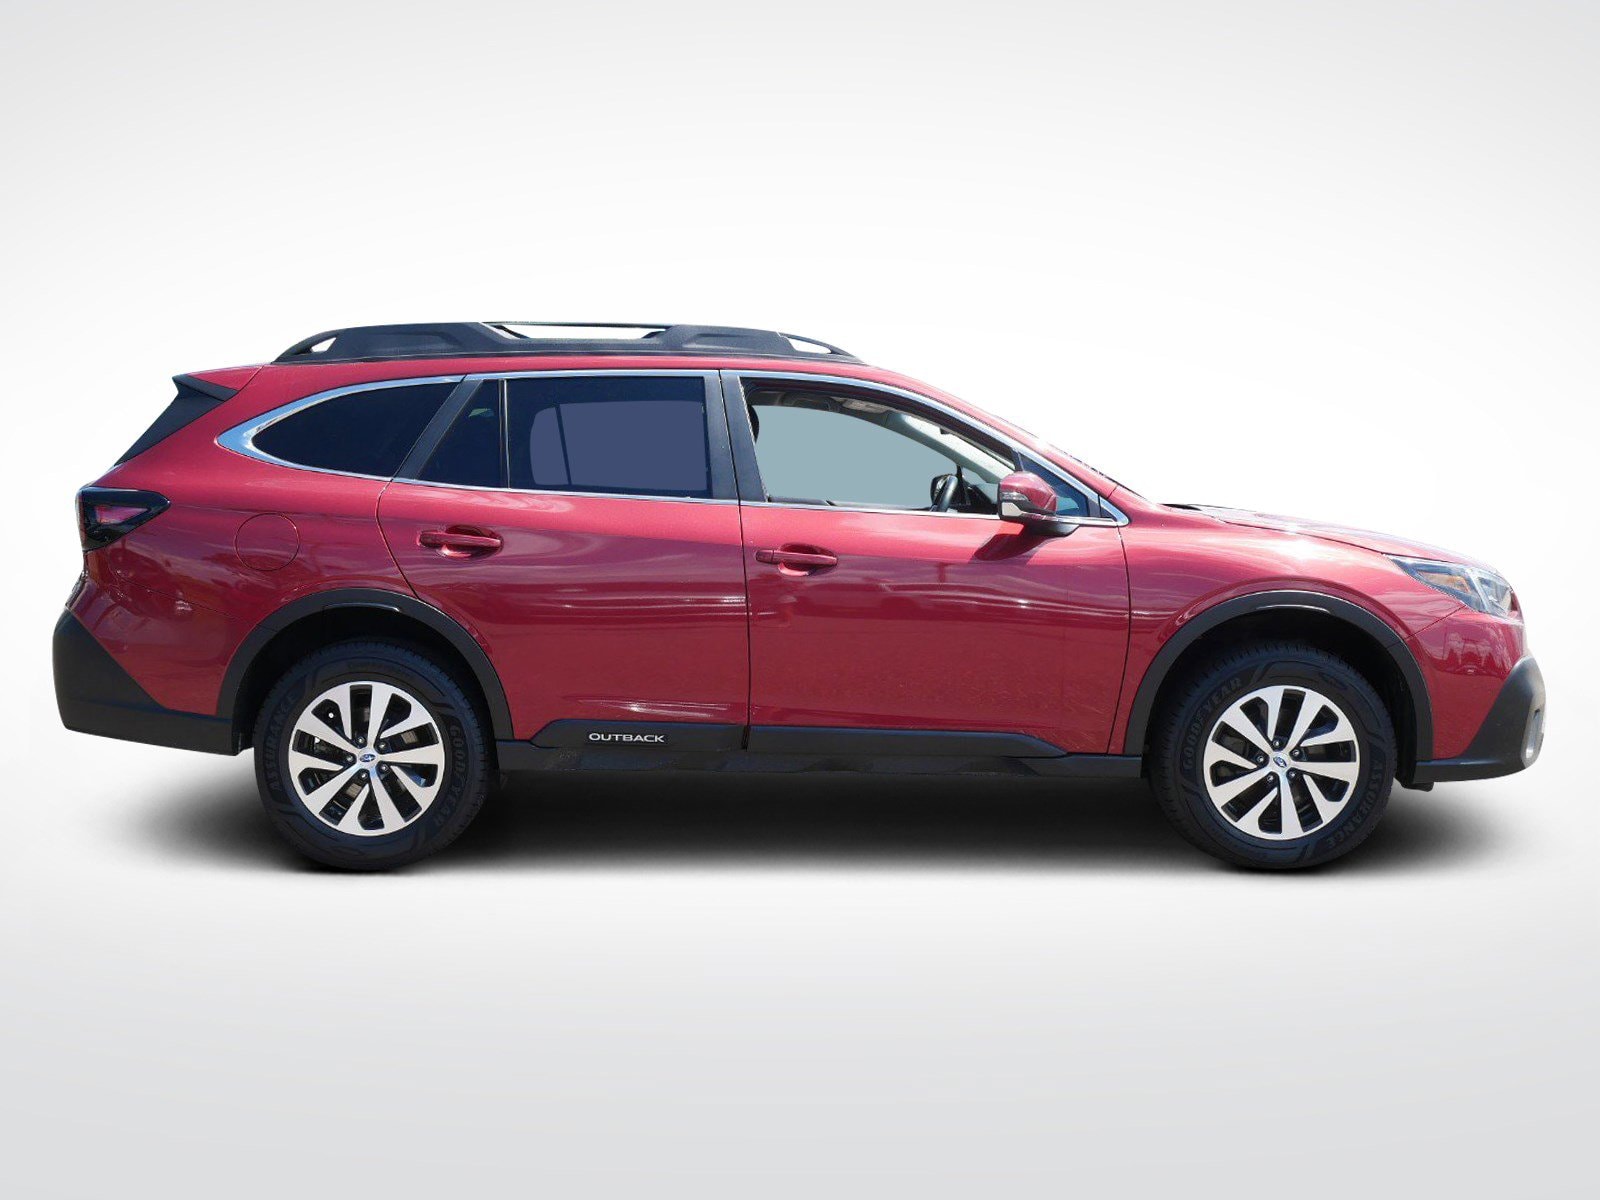 Used 2020 Subaru Outback Premium with VIN 4S4BTACC4L3121334 for sale in Baxter, Minnesota